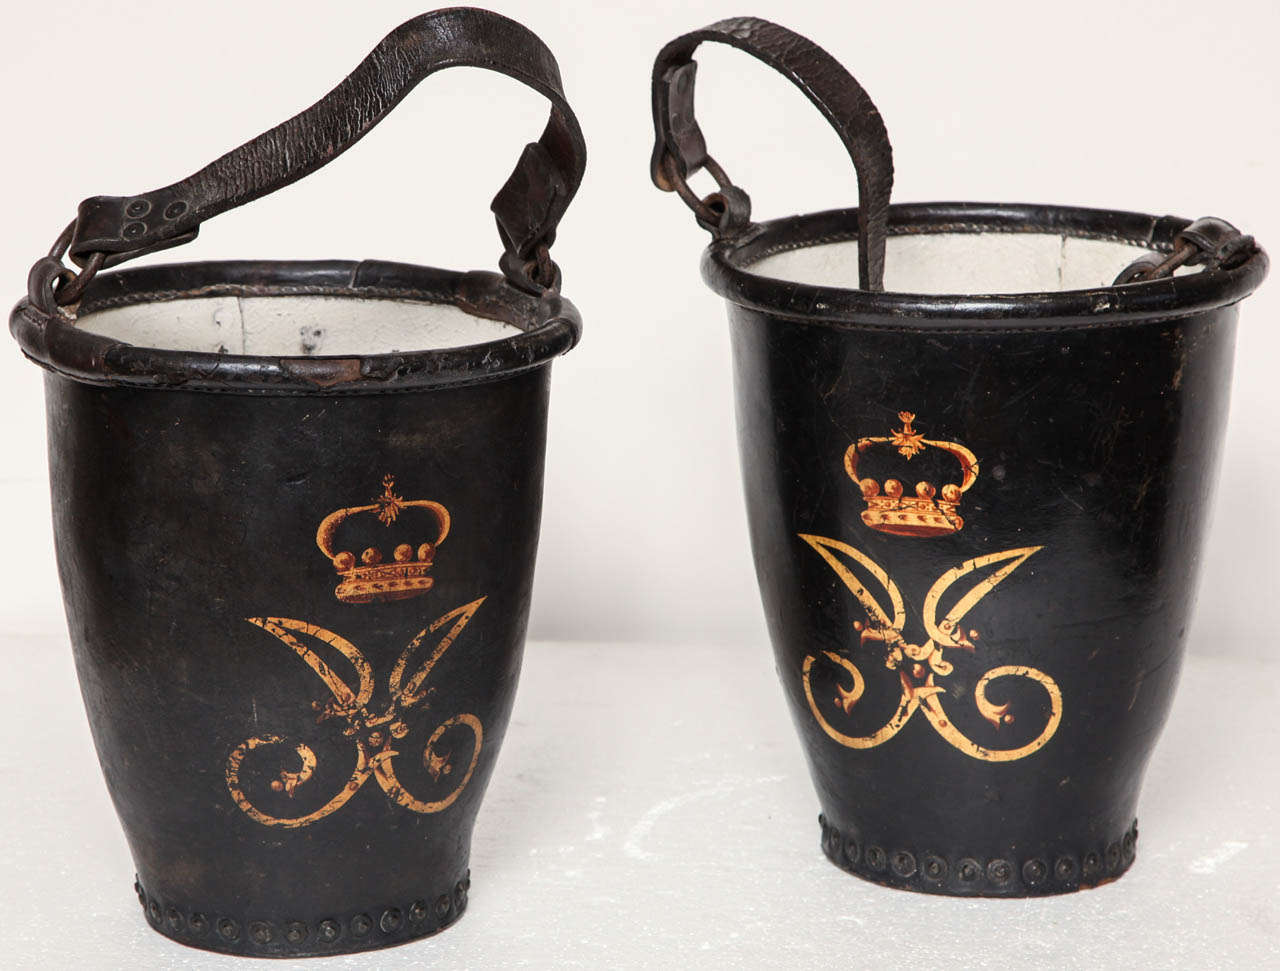 Pair of Leather Fire Buckets from Dromoland Castle with the Inchquin Crest, Ex Collection of the Family, circa 1850